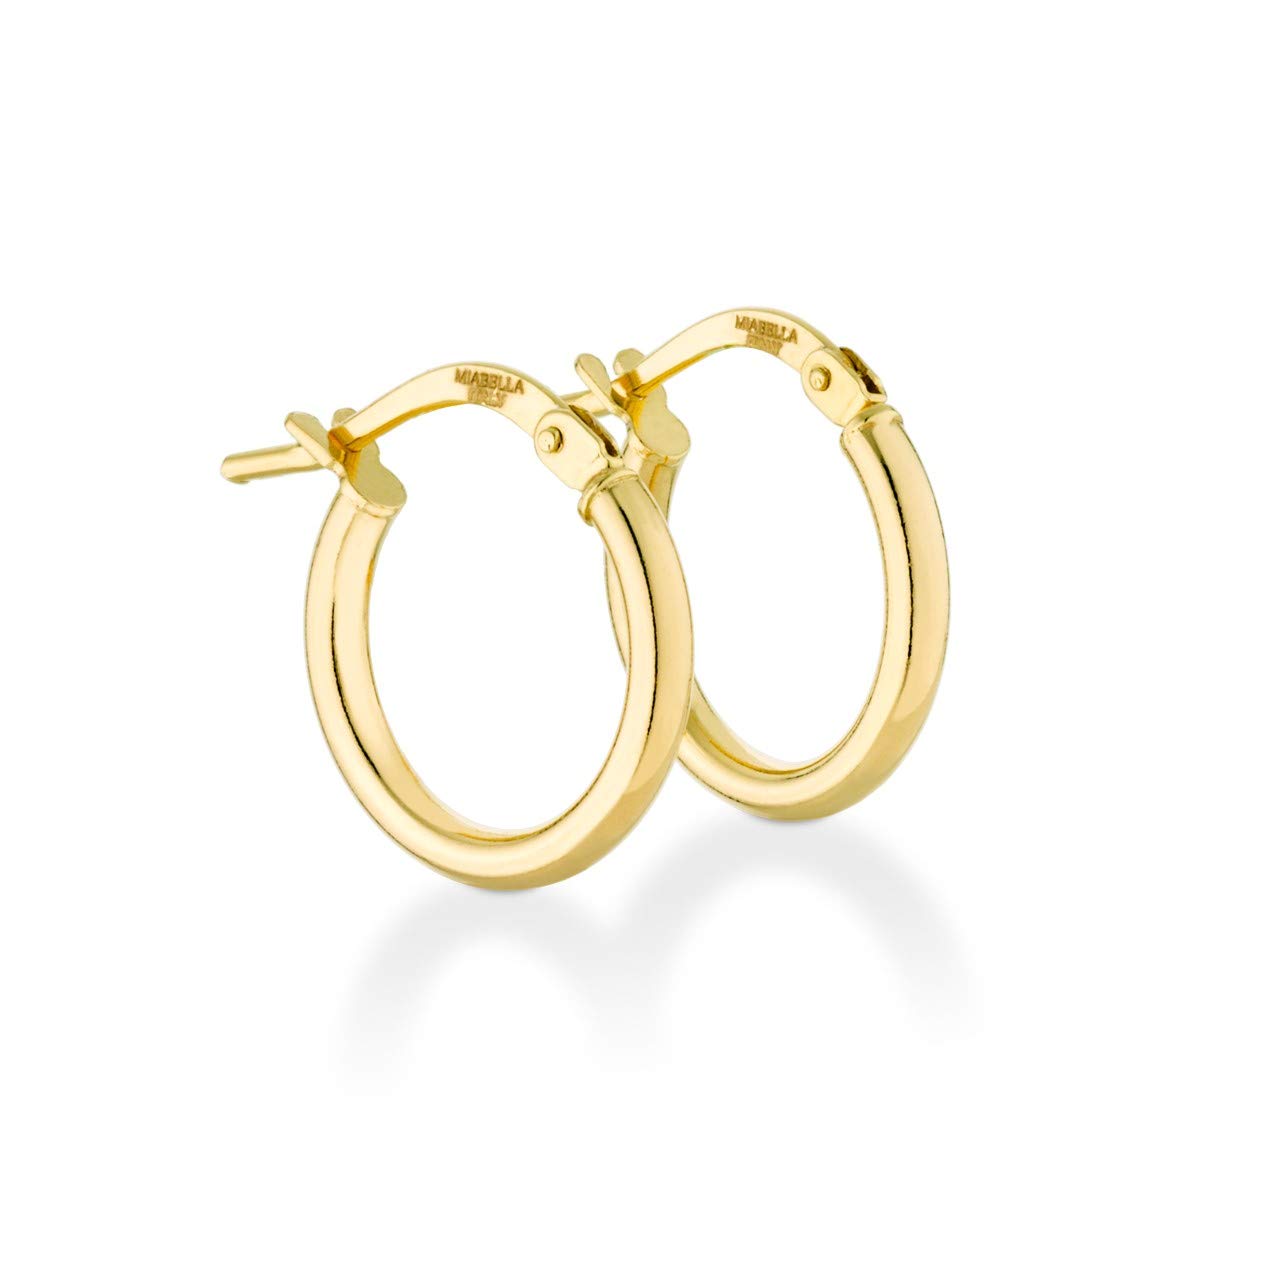 Miabella 18K Gold Over Sterling Silver 2mm High Polished Round Tube Hoop Earrings for Women Men Girls Lightweight Earrings Made in Italy